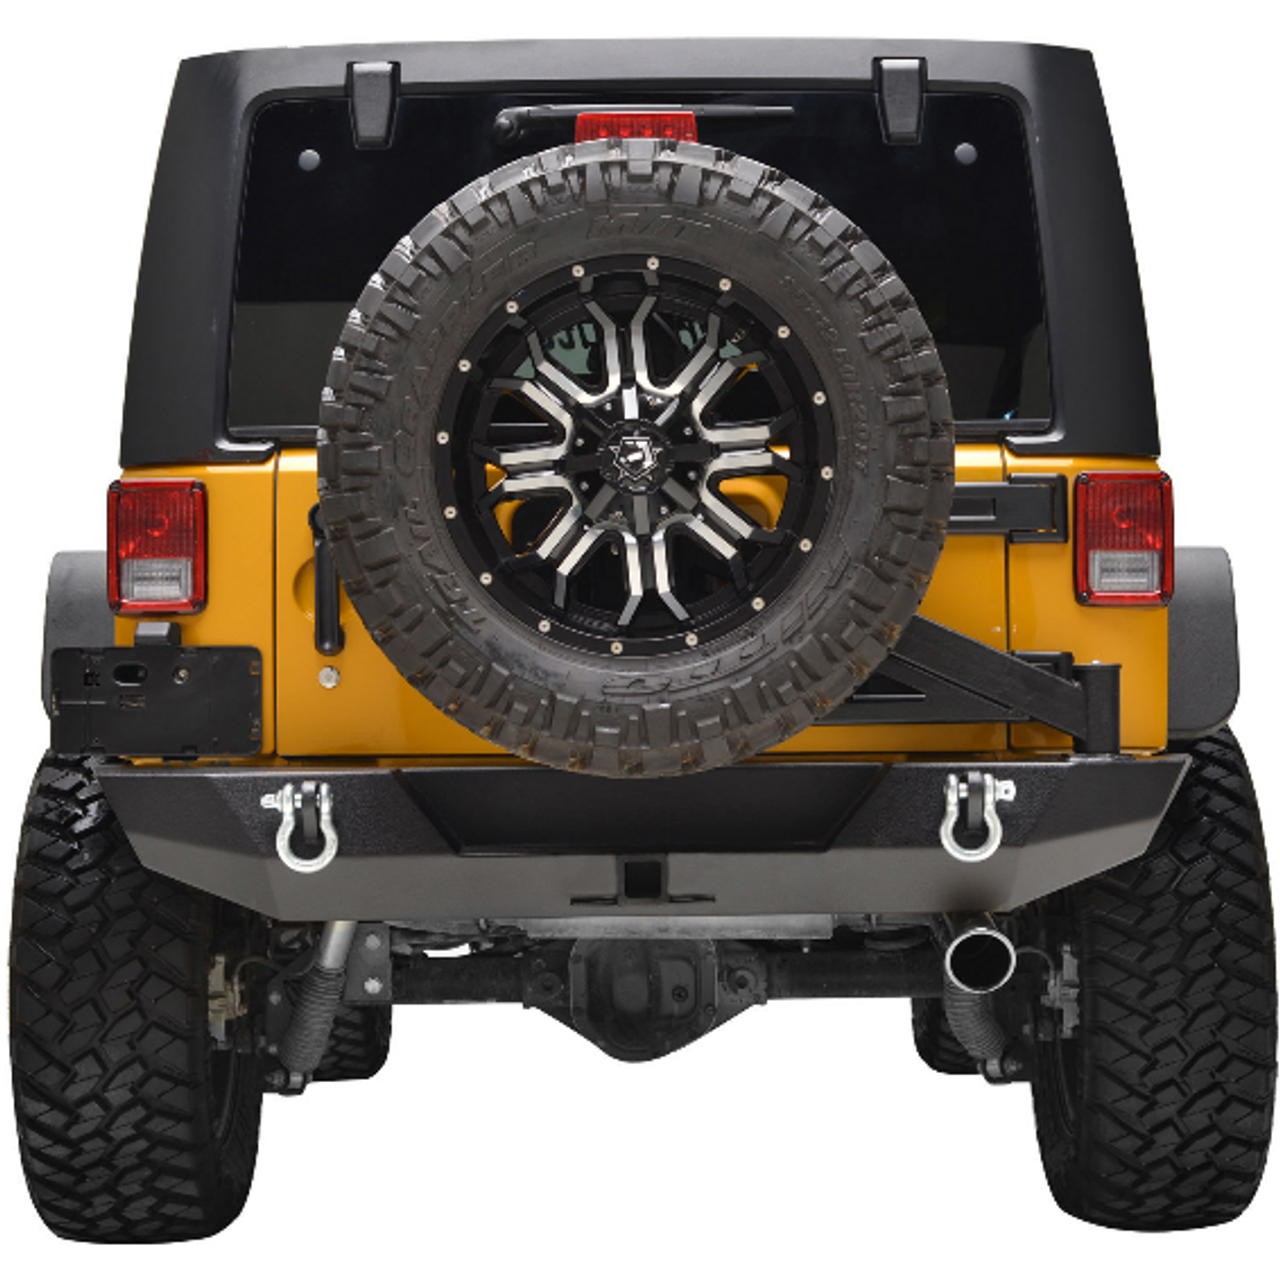 Paramount Automotive 51-0395 Rear Bumper with Tire Carrier for Jeep Wrangler JK 2007-2018